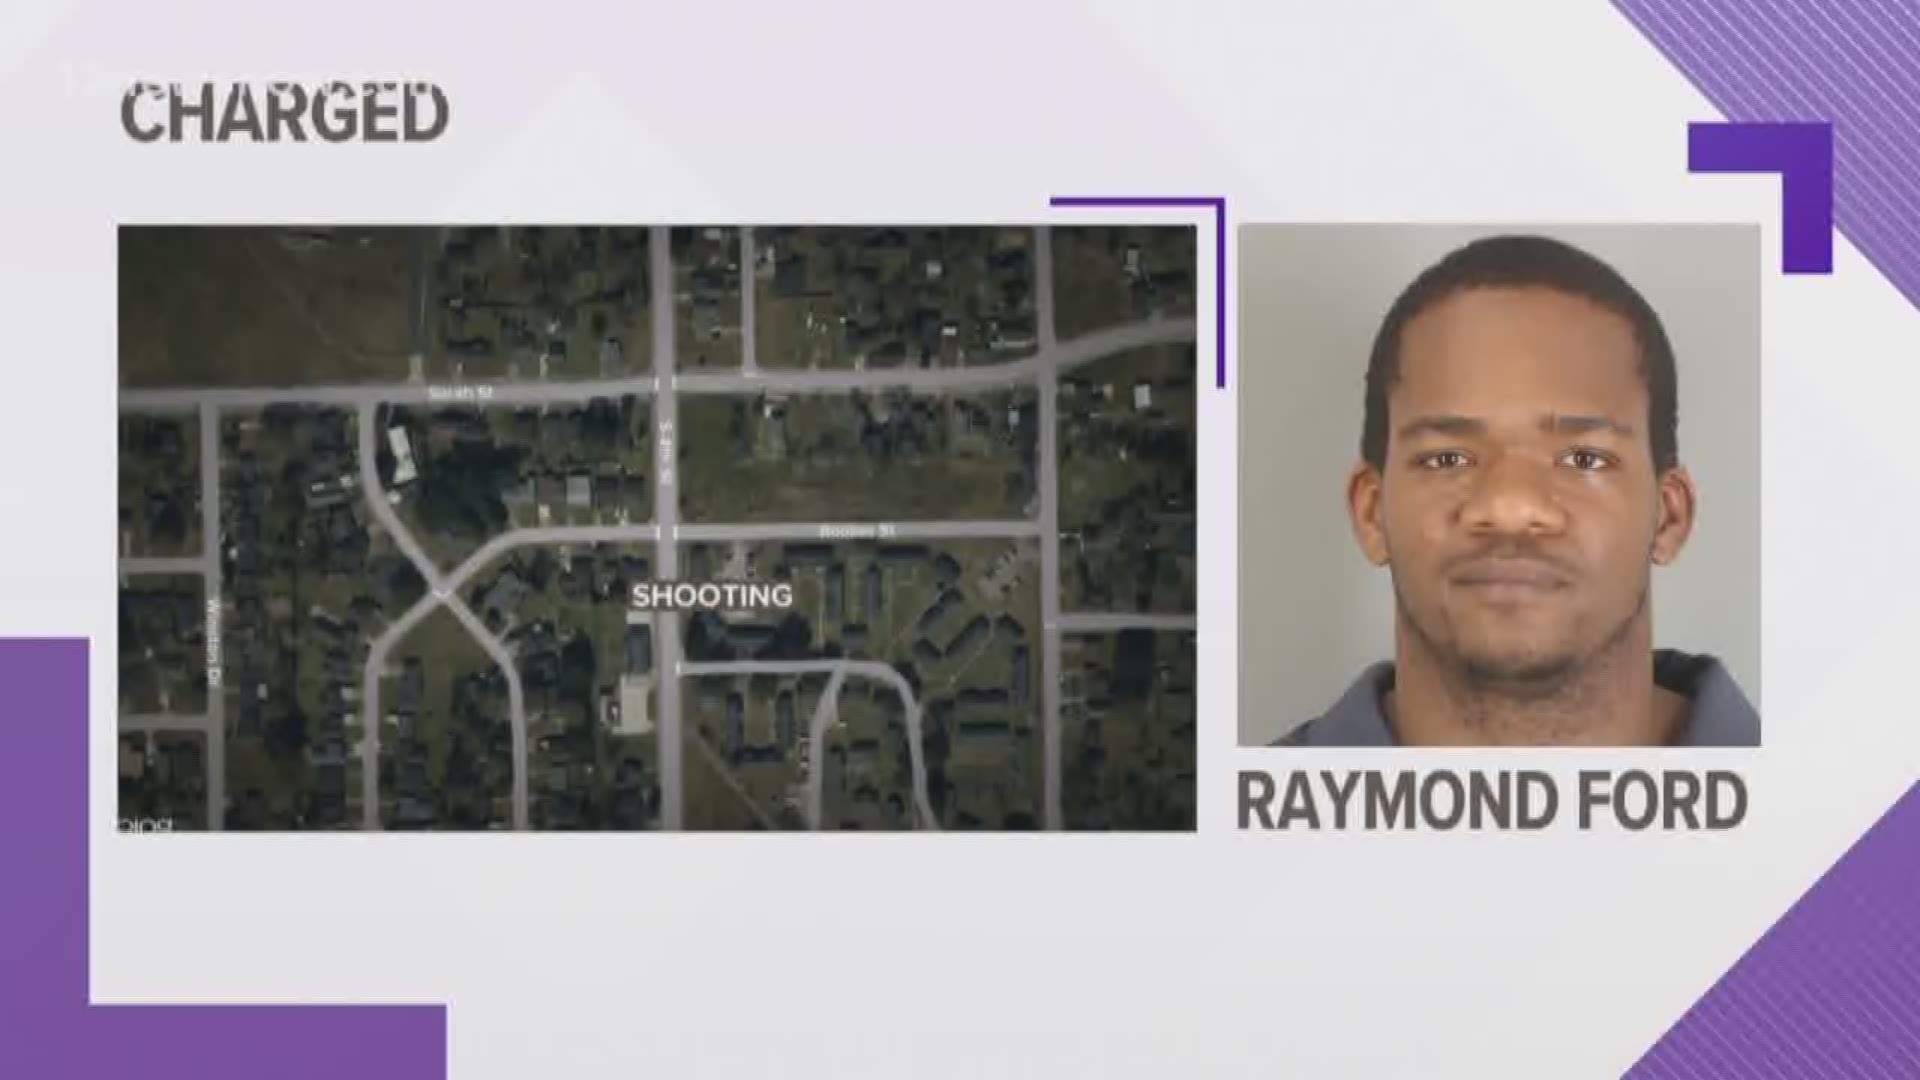 Raymond Ford is accused of shooting and killing a 19-year-old